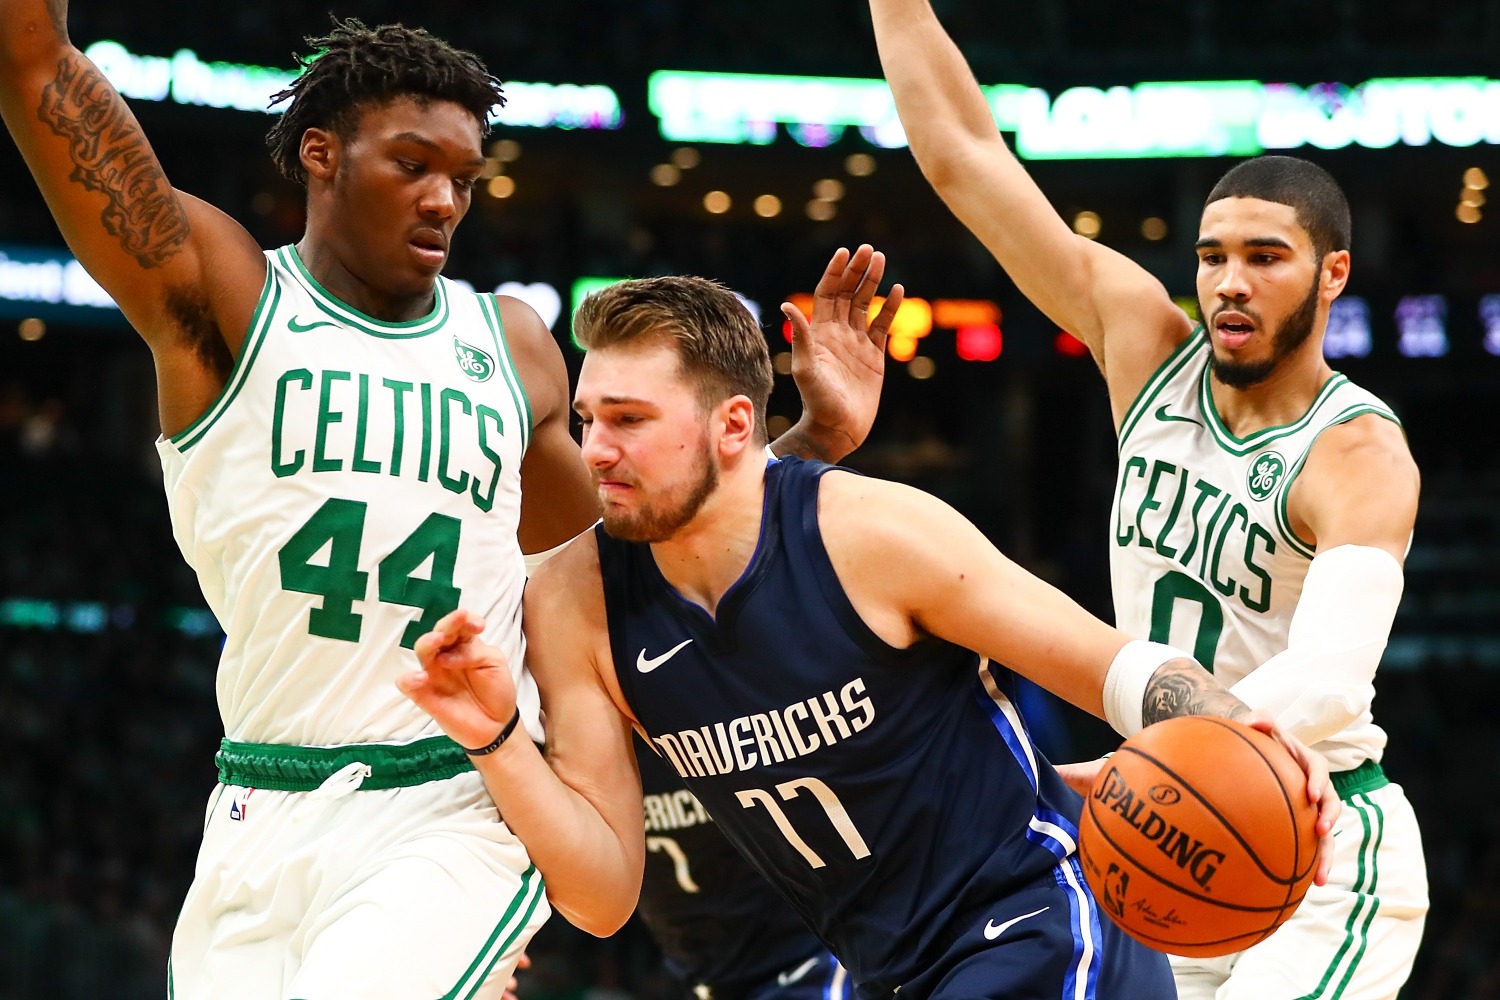 Jayson Tatum and Jaylen Brown are already stars, but the Boston Celtics have another budding star in 22-year-old center Robert Williams.